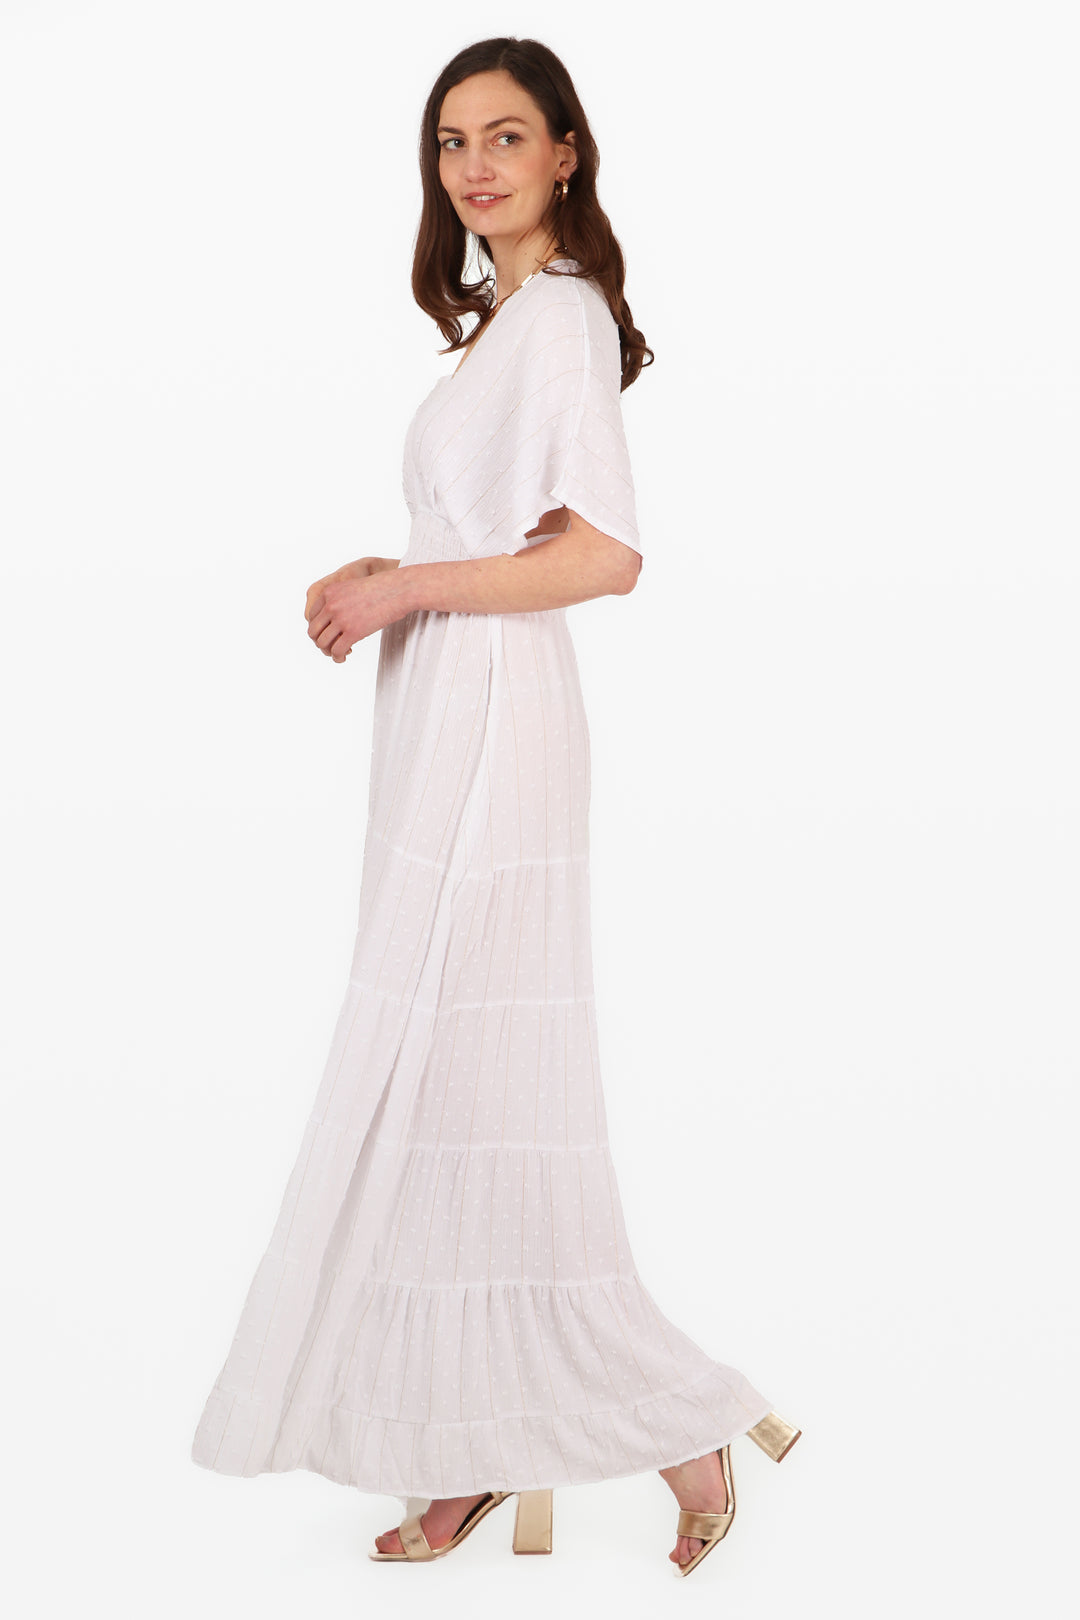 model wearing a white maxi length kaftan dress with a metallic gold foil stripe detail and dobby material